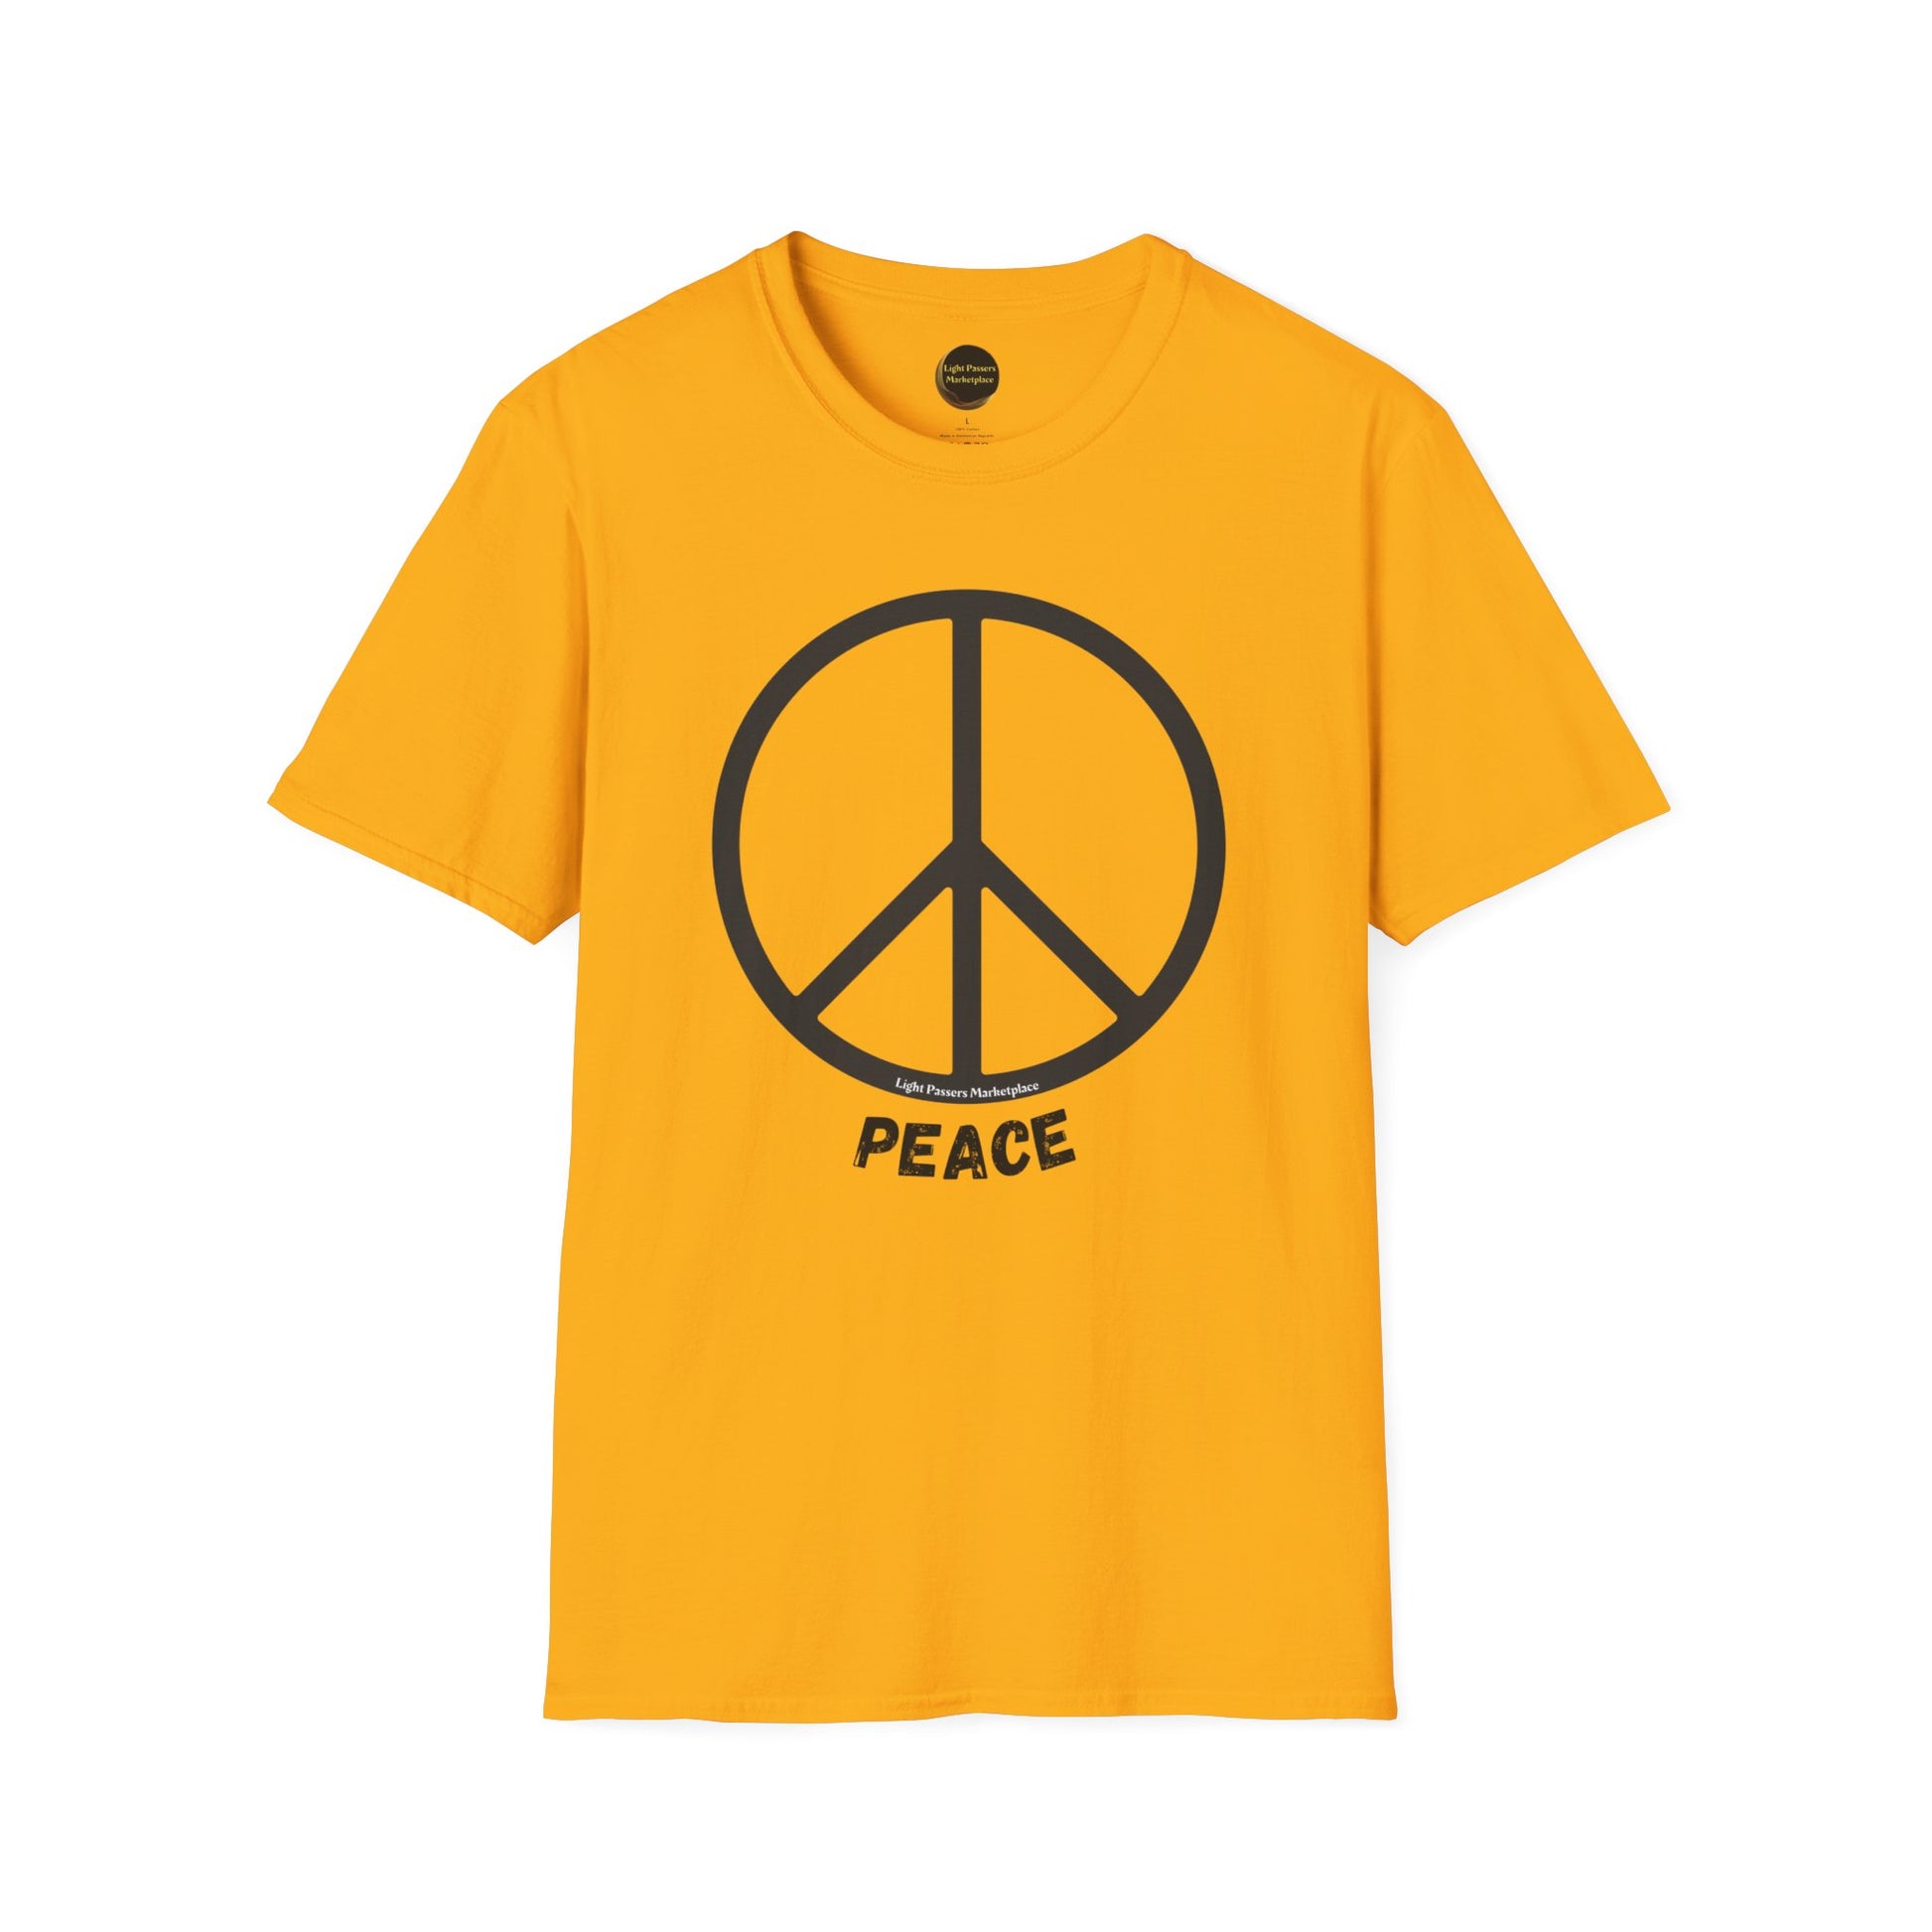 A soft 100% cotton unisex t-shirt featuring a peace sign design. Lightweight fabric, twill tape shoulders, no side seams, ribbed collar. Ethically made with US cotton.